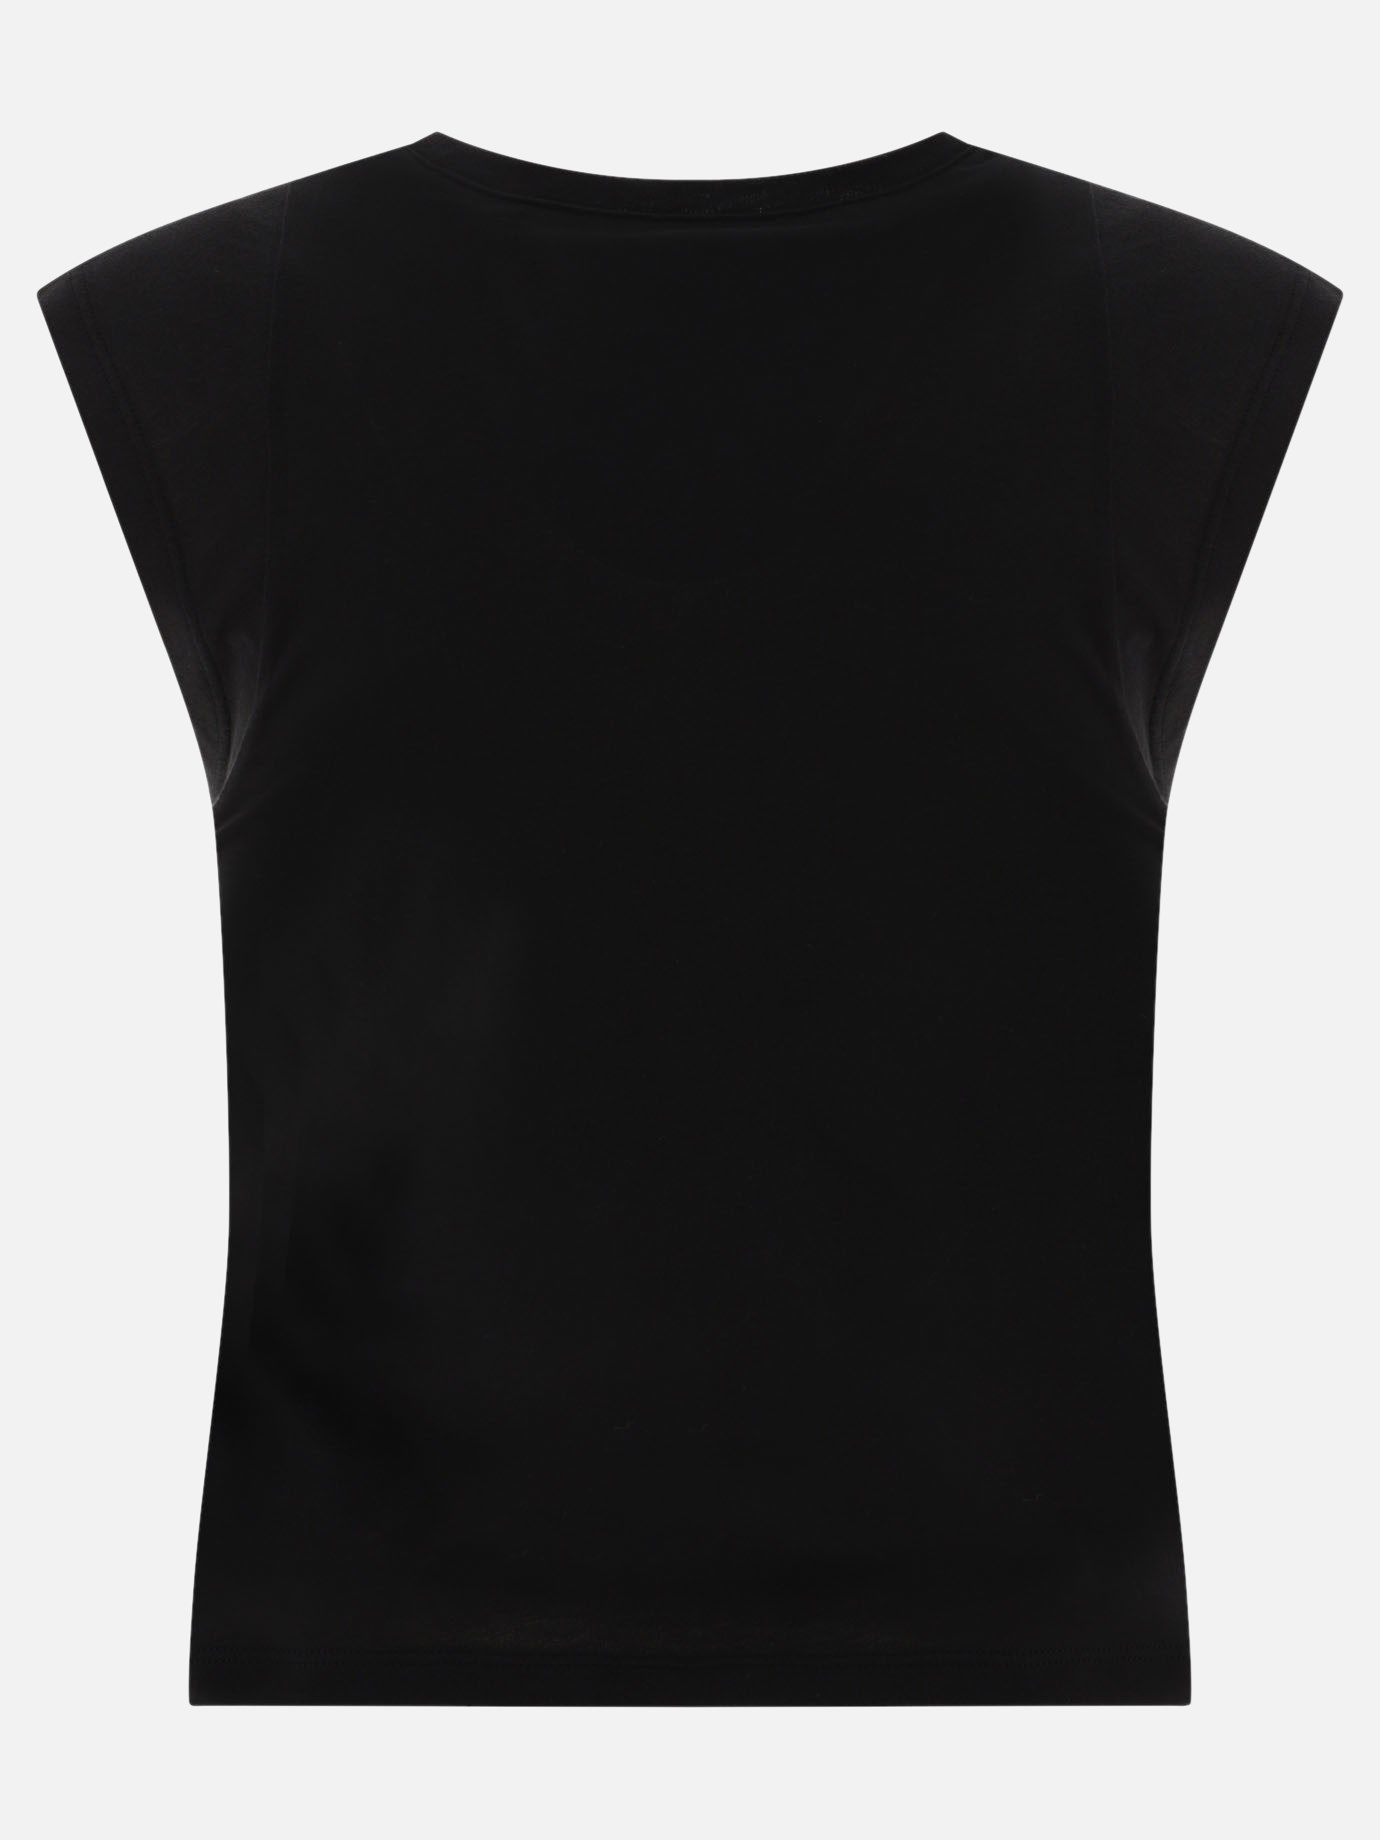  Le High Rise Muscle  t-shirt by Frame